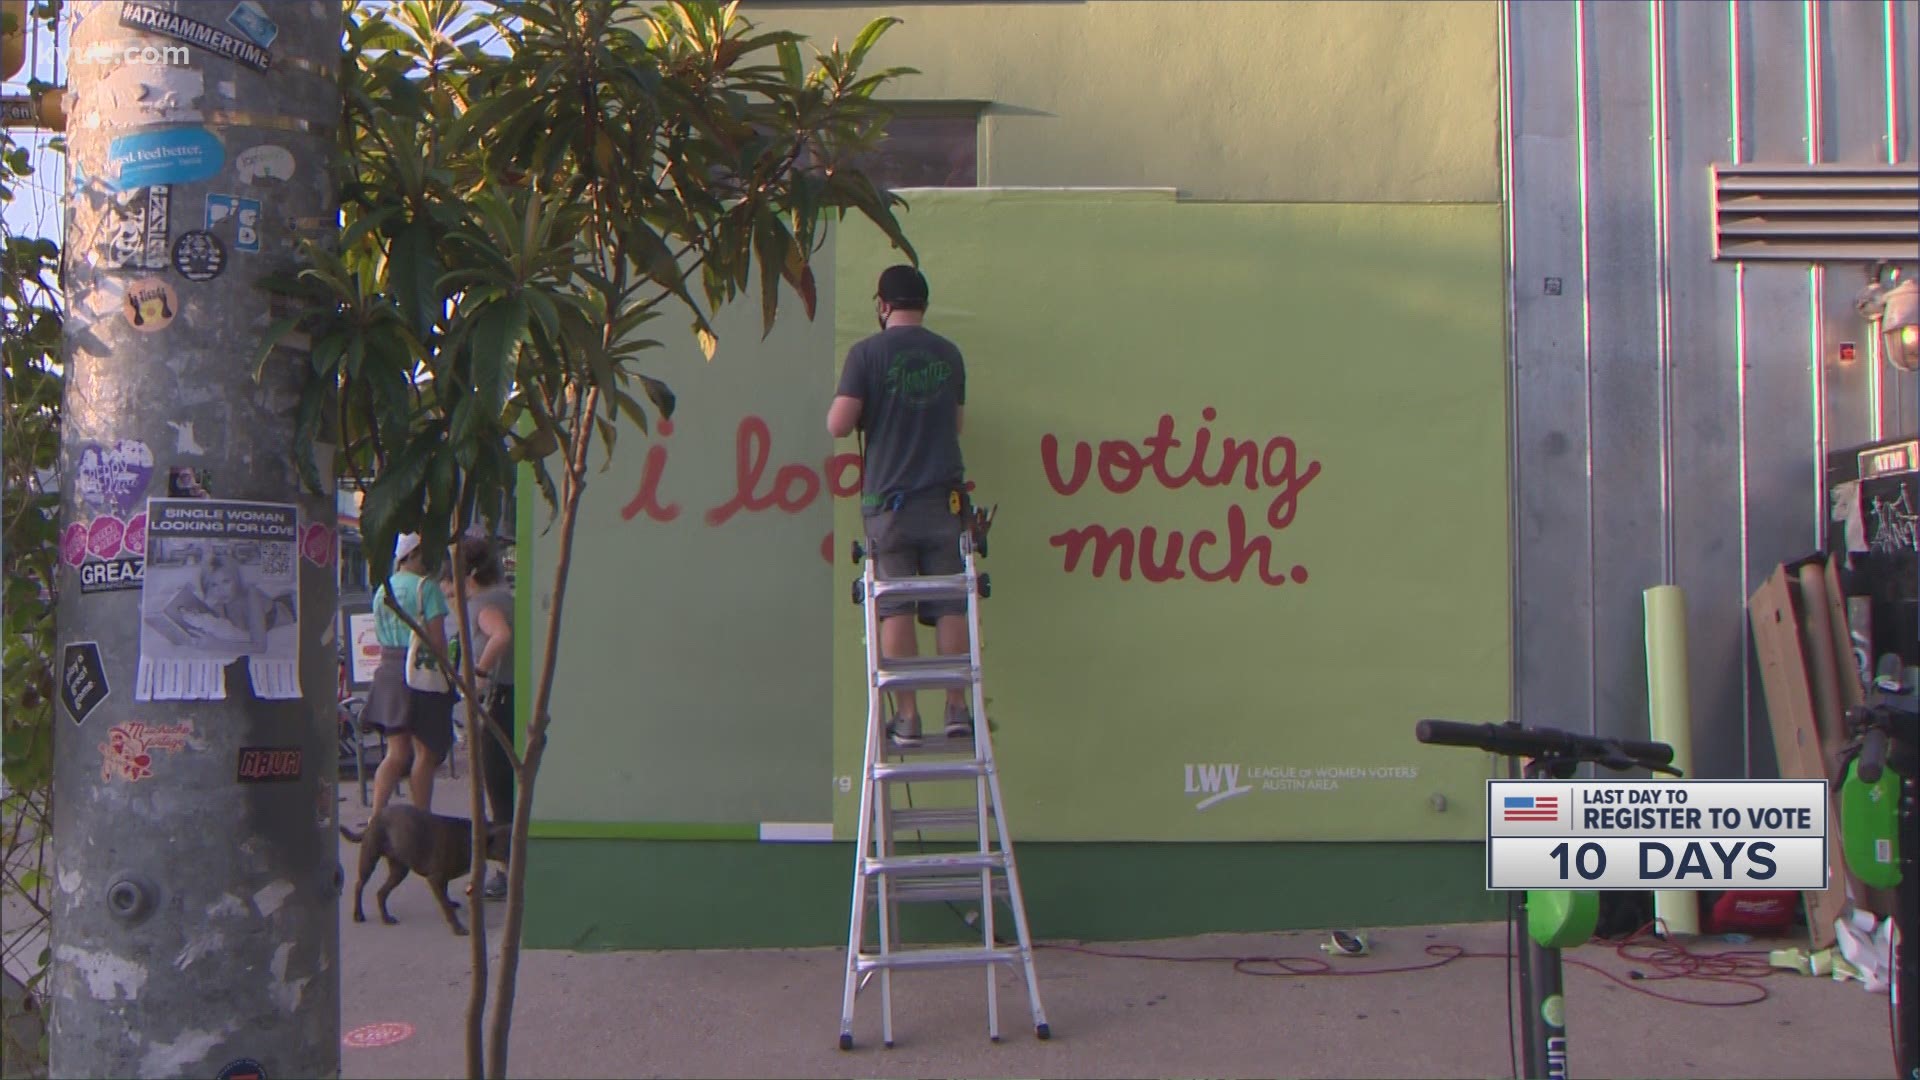 The iconic Austin "I love you so much" mural was changed ahead of the 2020 election to encourage voting. It now says, "I love voting so much."